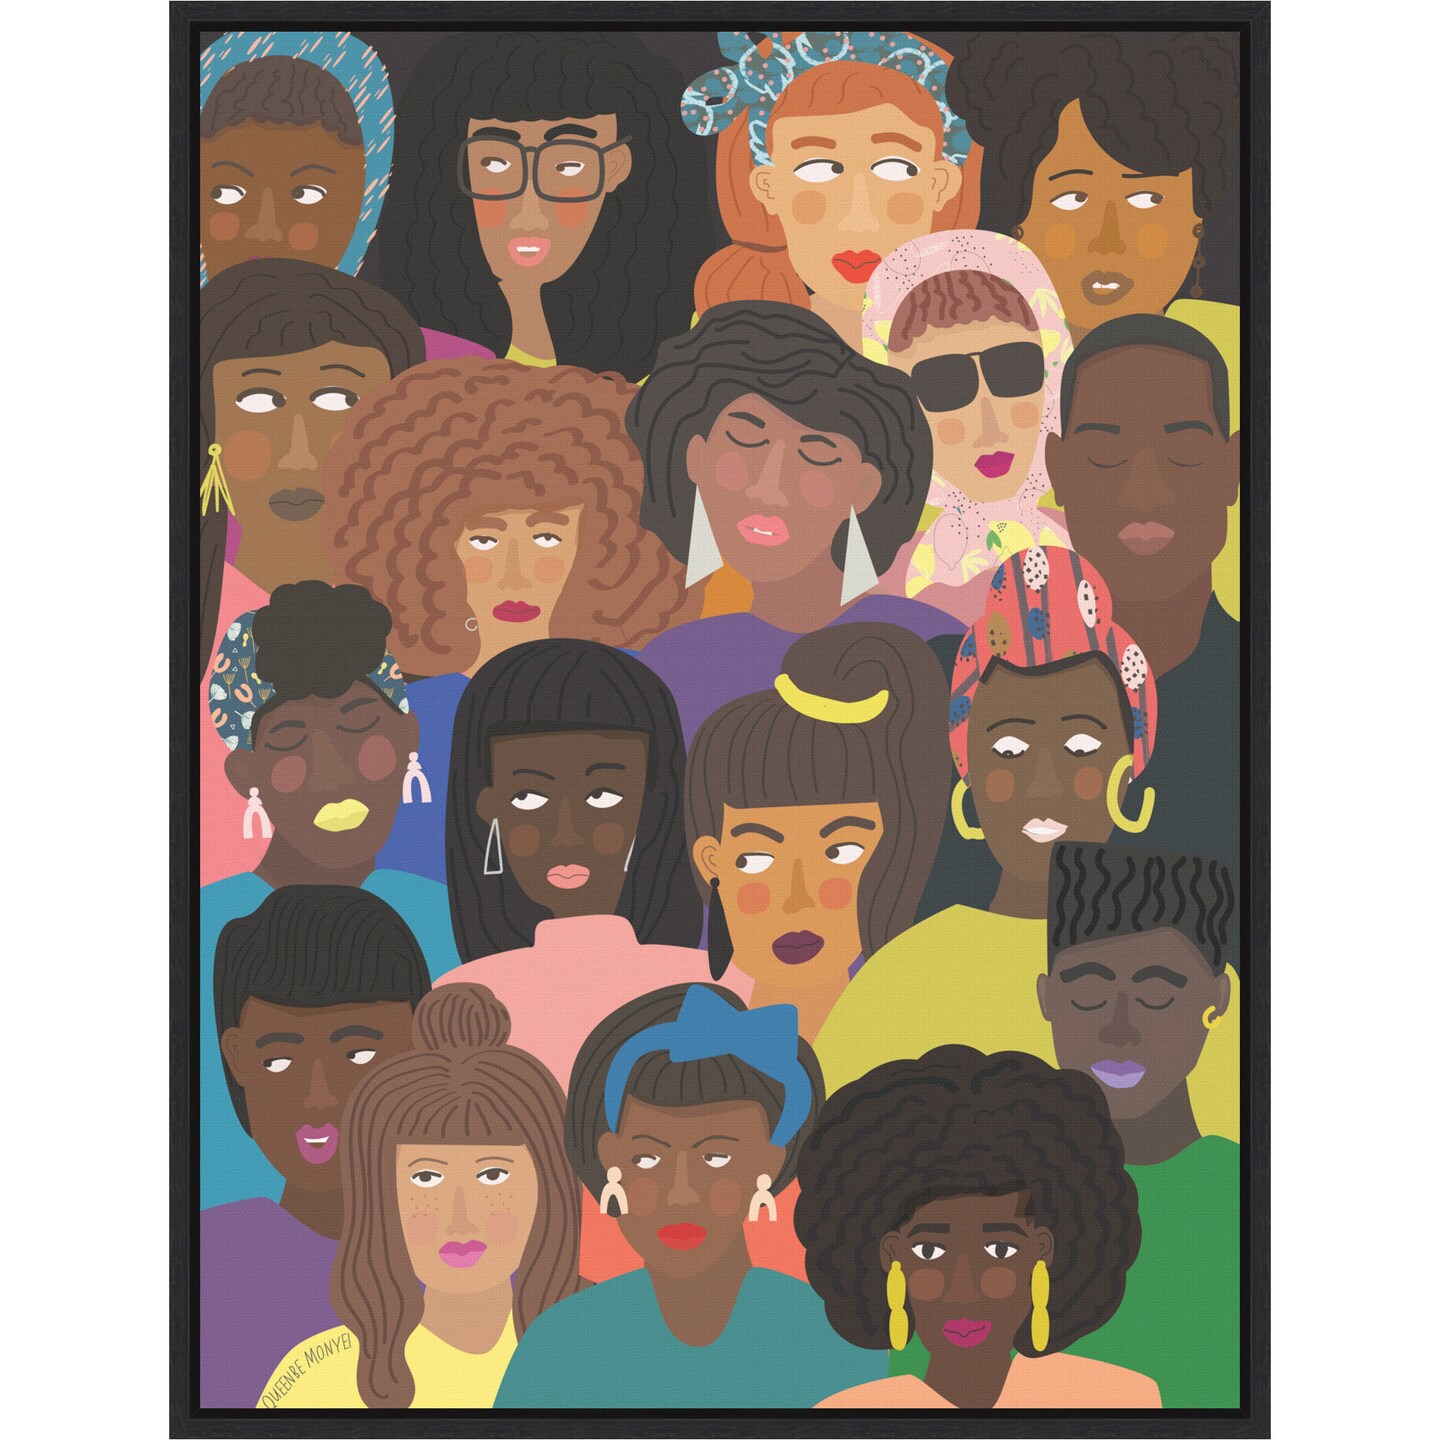 Black People United by Queenbe Monyei 18-in. W x 24-in. H. Canvas Wall Art Print Framed in Black